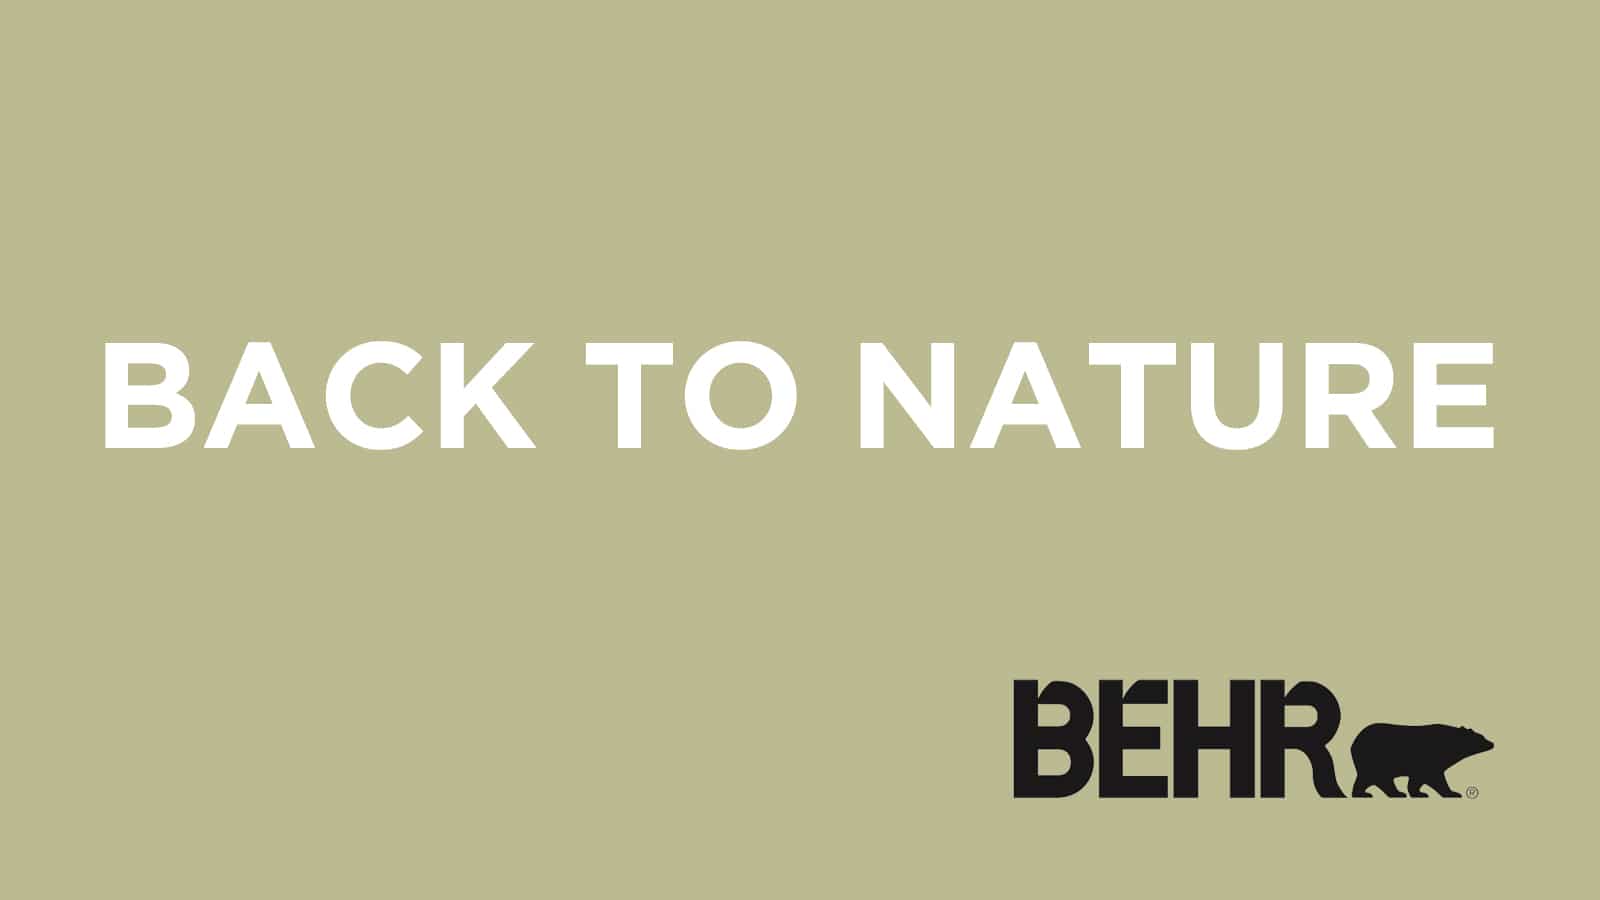 2020 Colors of the Year – Behr Back to Nature